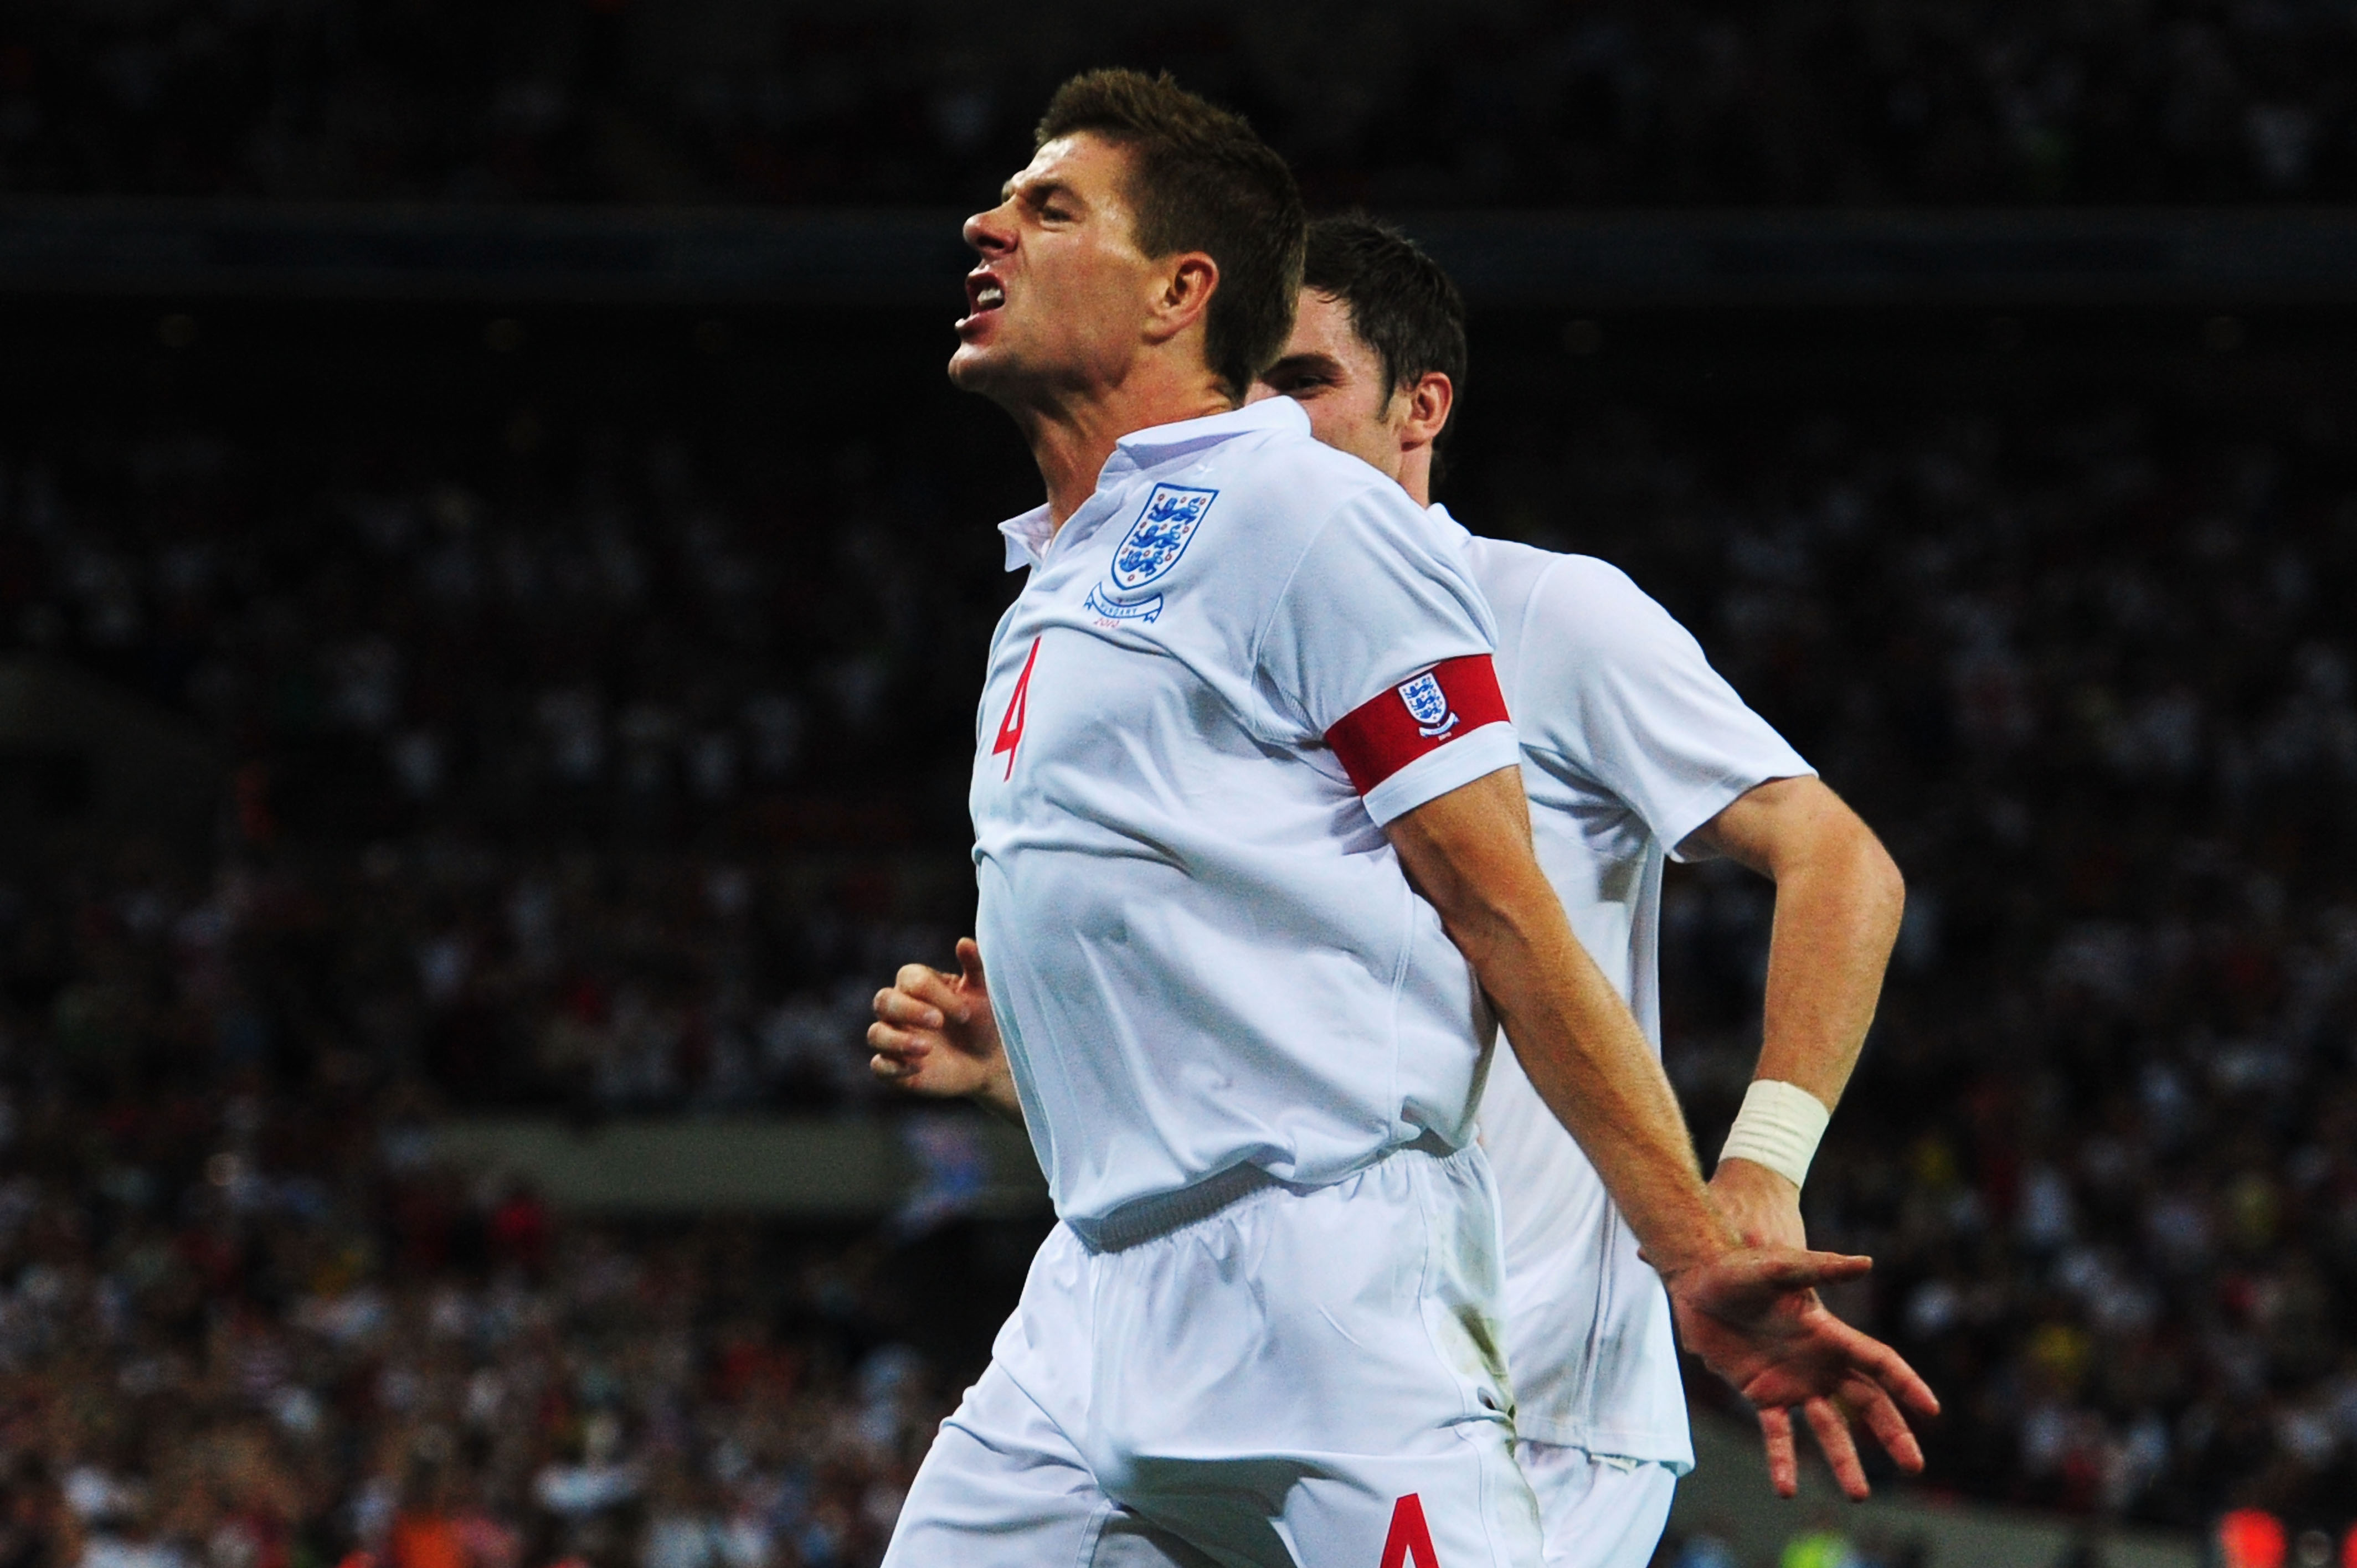 LONDON, ENGLAND - AUGUST 11:  Steven Gerrard of England celebrates after scoring his team's first goal to level the scores at 1-1 during the International Friendly match between England and Hungary at Wembley Stadium on August 11, 2010 in London, England.